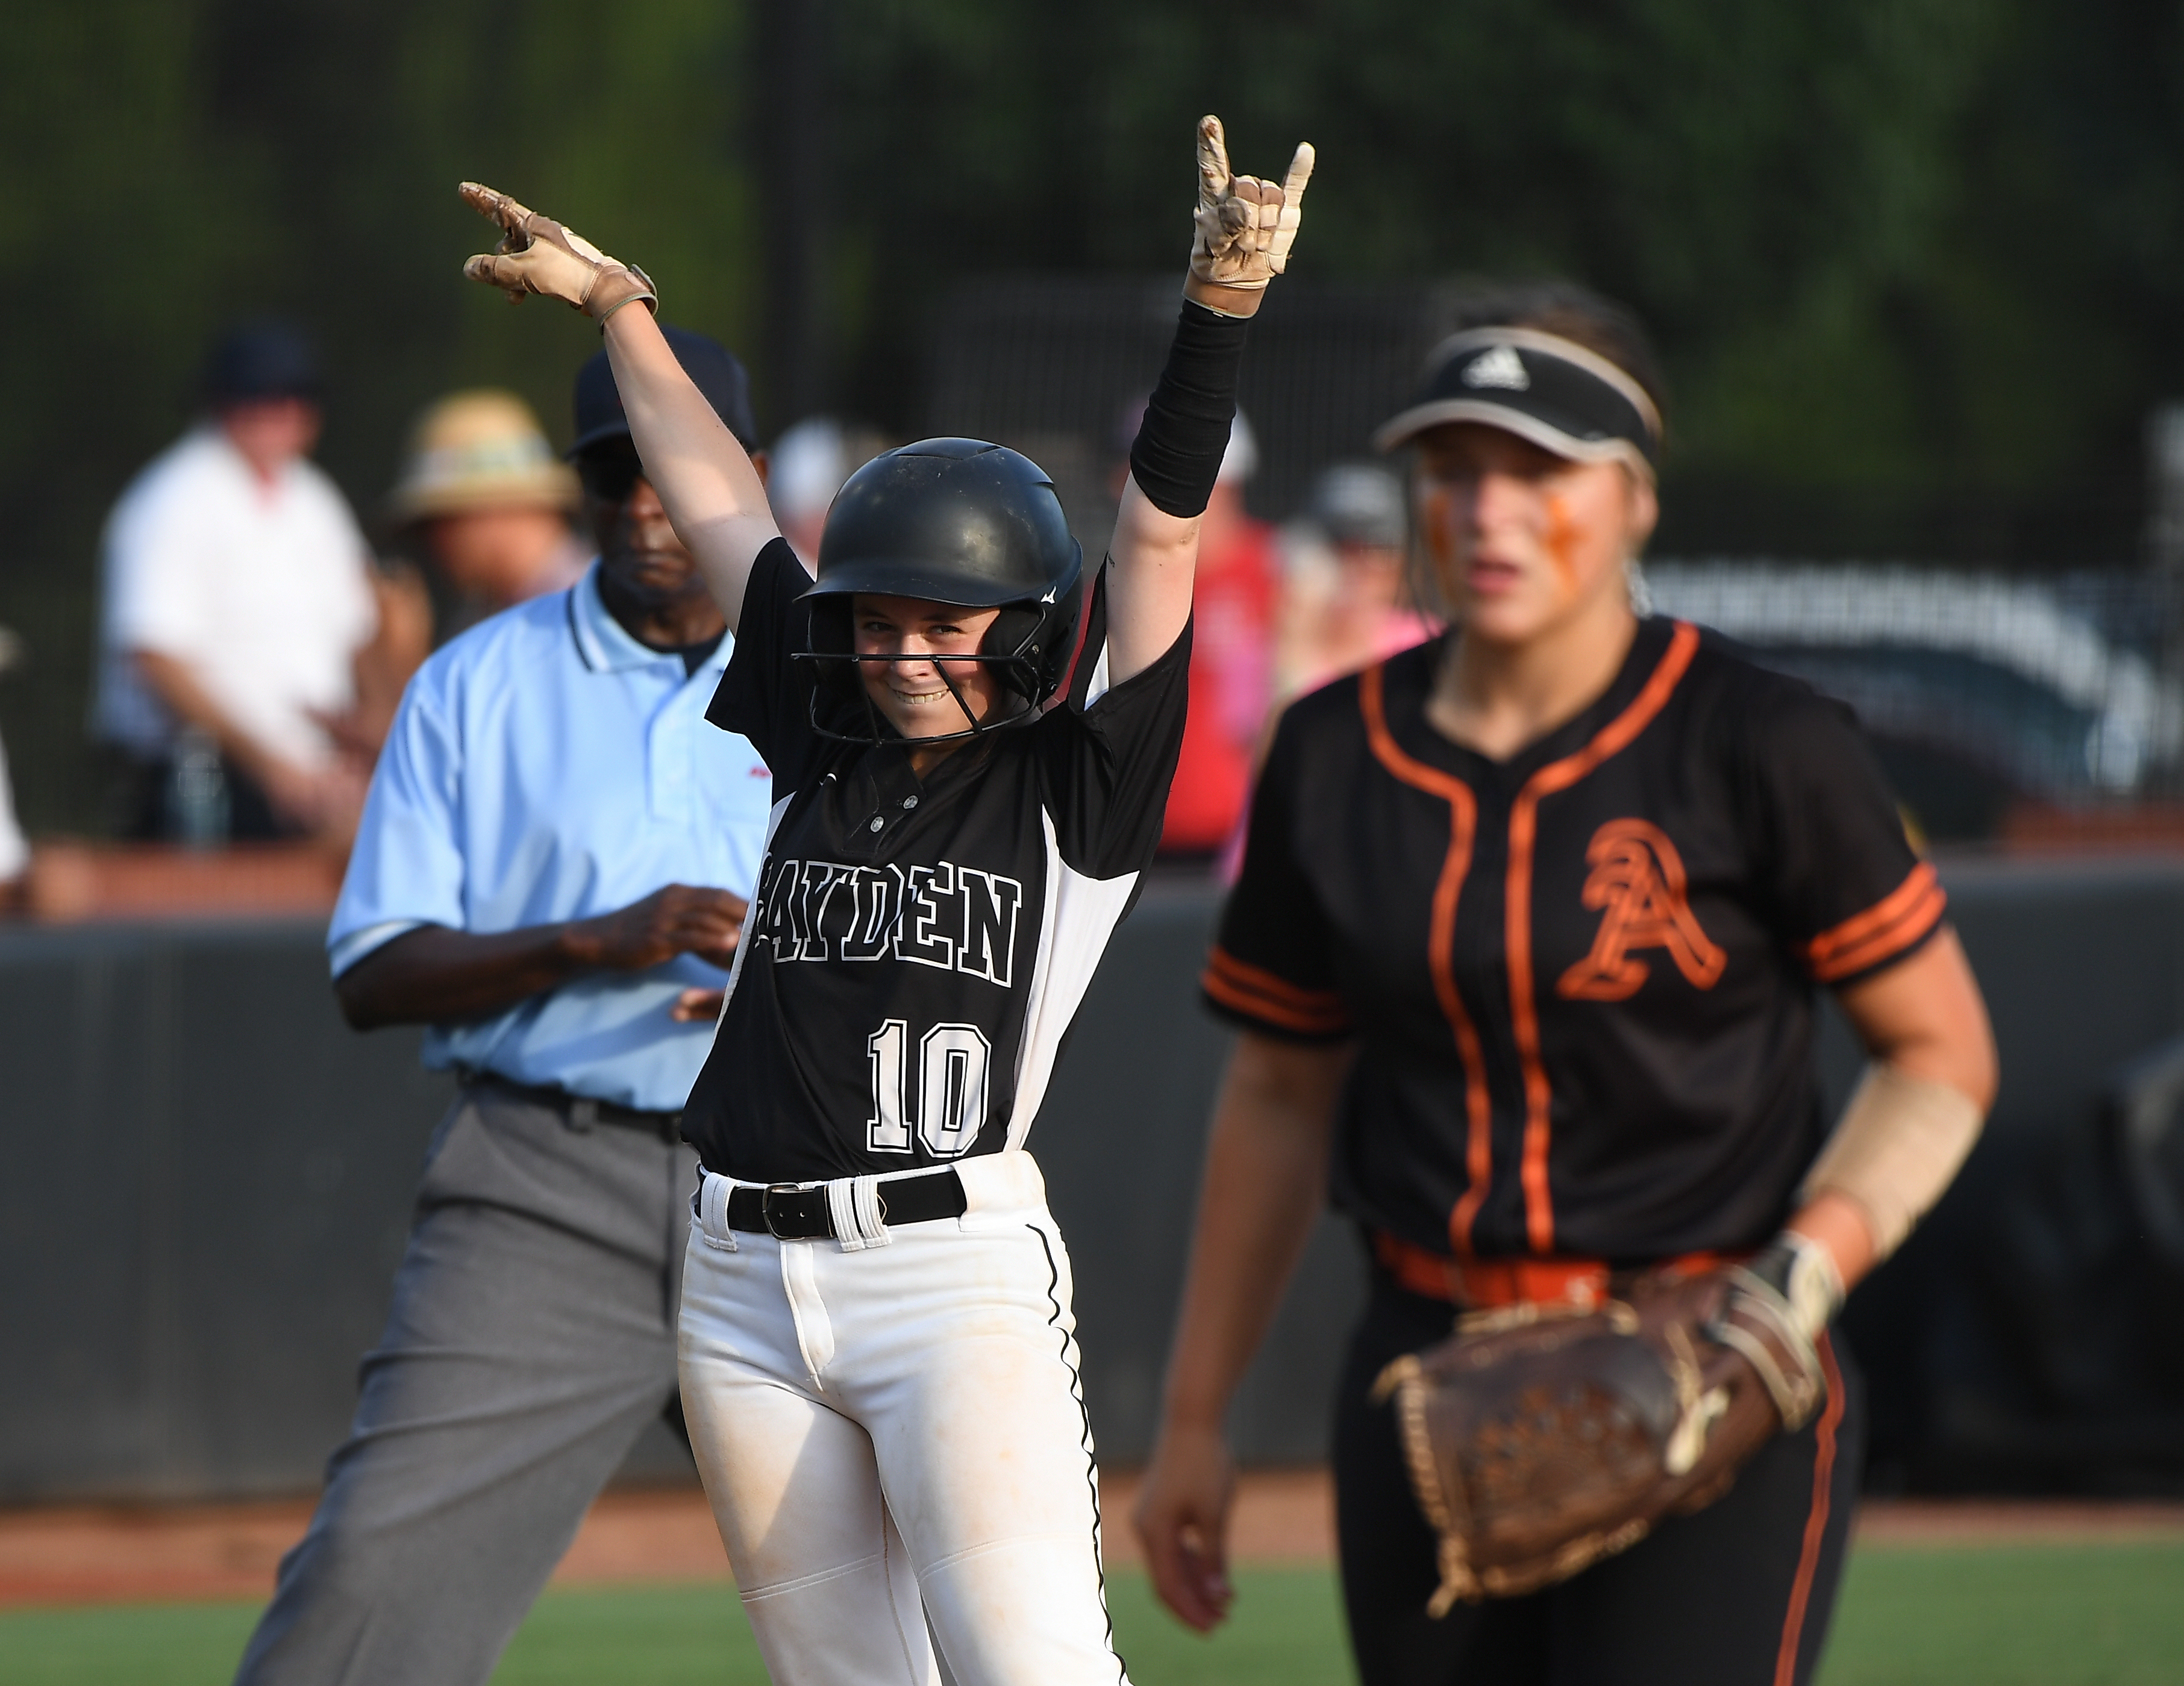 Hayden’s Alyssa Jinright celebrates her arrival at third with a sixth-inning triple that led to the go-ahead run in the Lady Wildcats’ Game 1 victory. (Photo by B.J. Franklin)